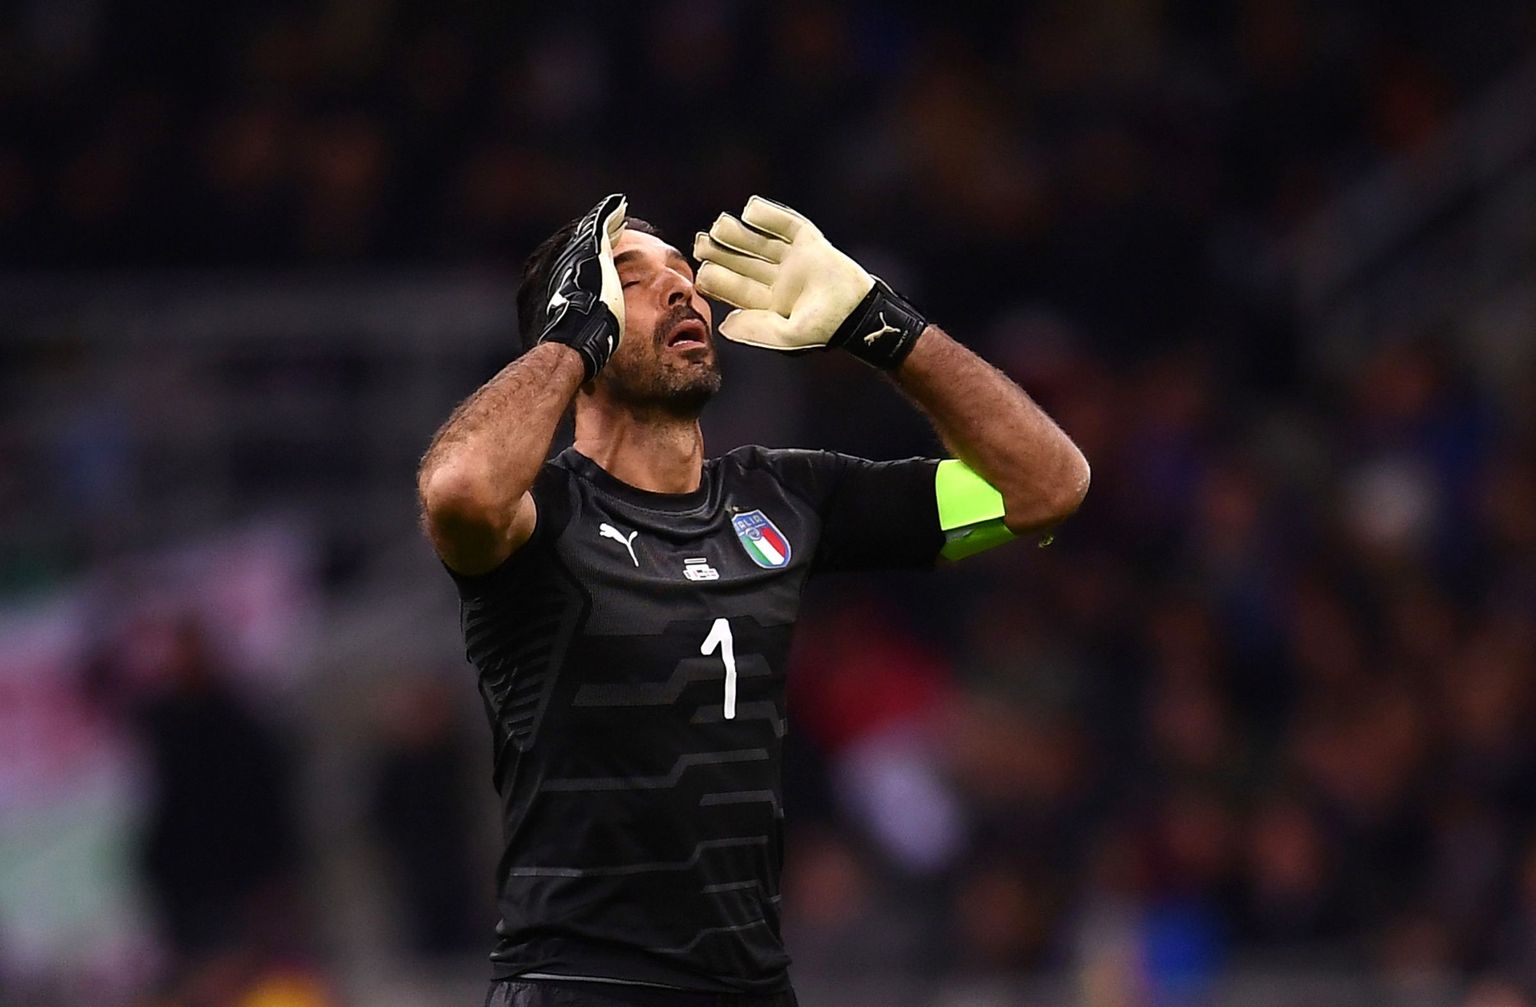 TOPSHOT - Italy's goalkeeper Gianluigi Buffon reacts during the FIFA World Cup 2018 qualification football match between Italy and Sweden, on November 13, 2017 at the San Siro stadium in Milan. / AFP PHOTO / Marco BERTORELLO